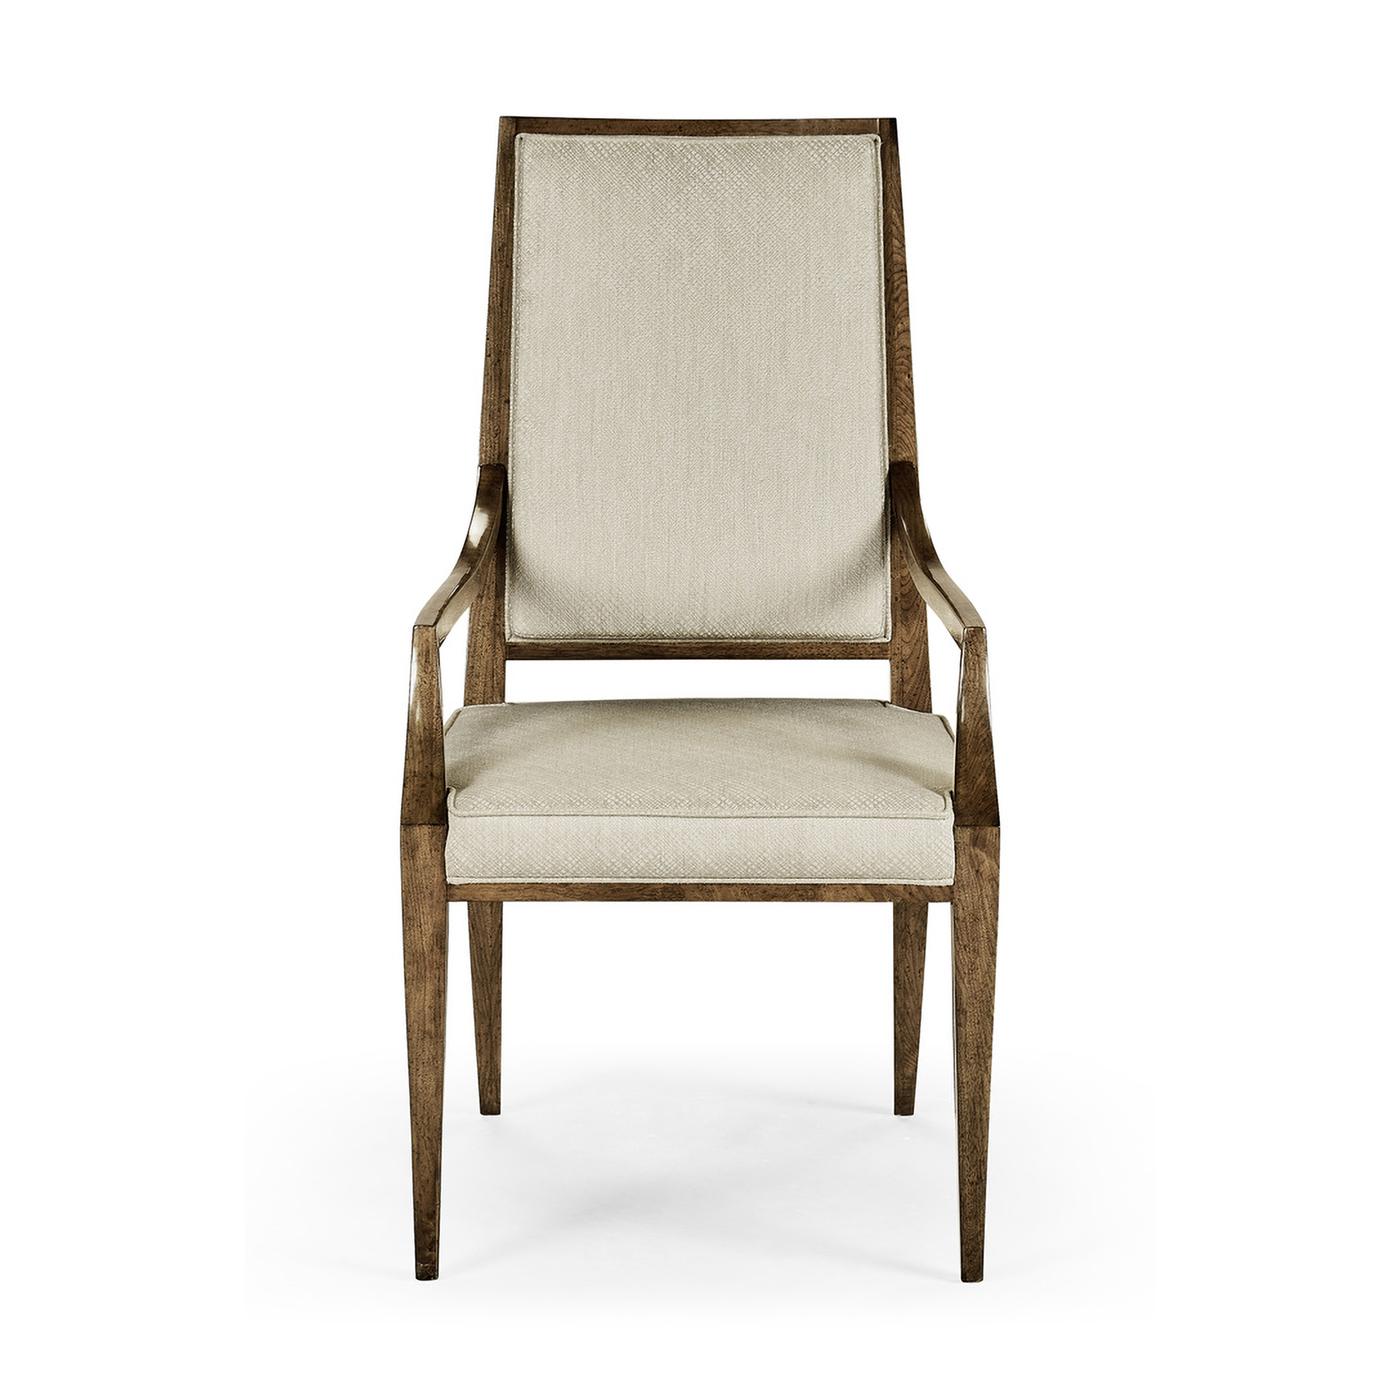 Mid century walnut dining armchair, sculpted from American walnut, with a transparent, hand-rubbed finish. This chair has elegant simple lines and is upholstered in a performance fabric. 

Dimensions: 23